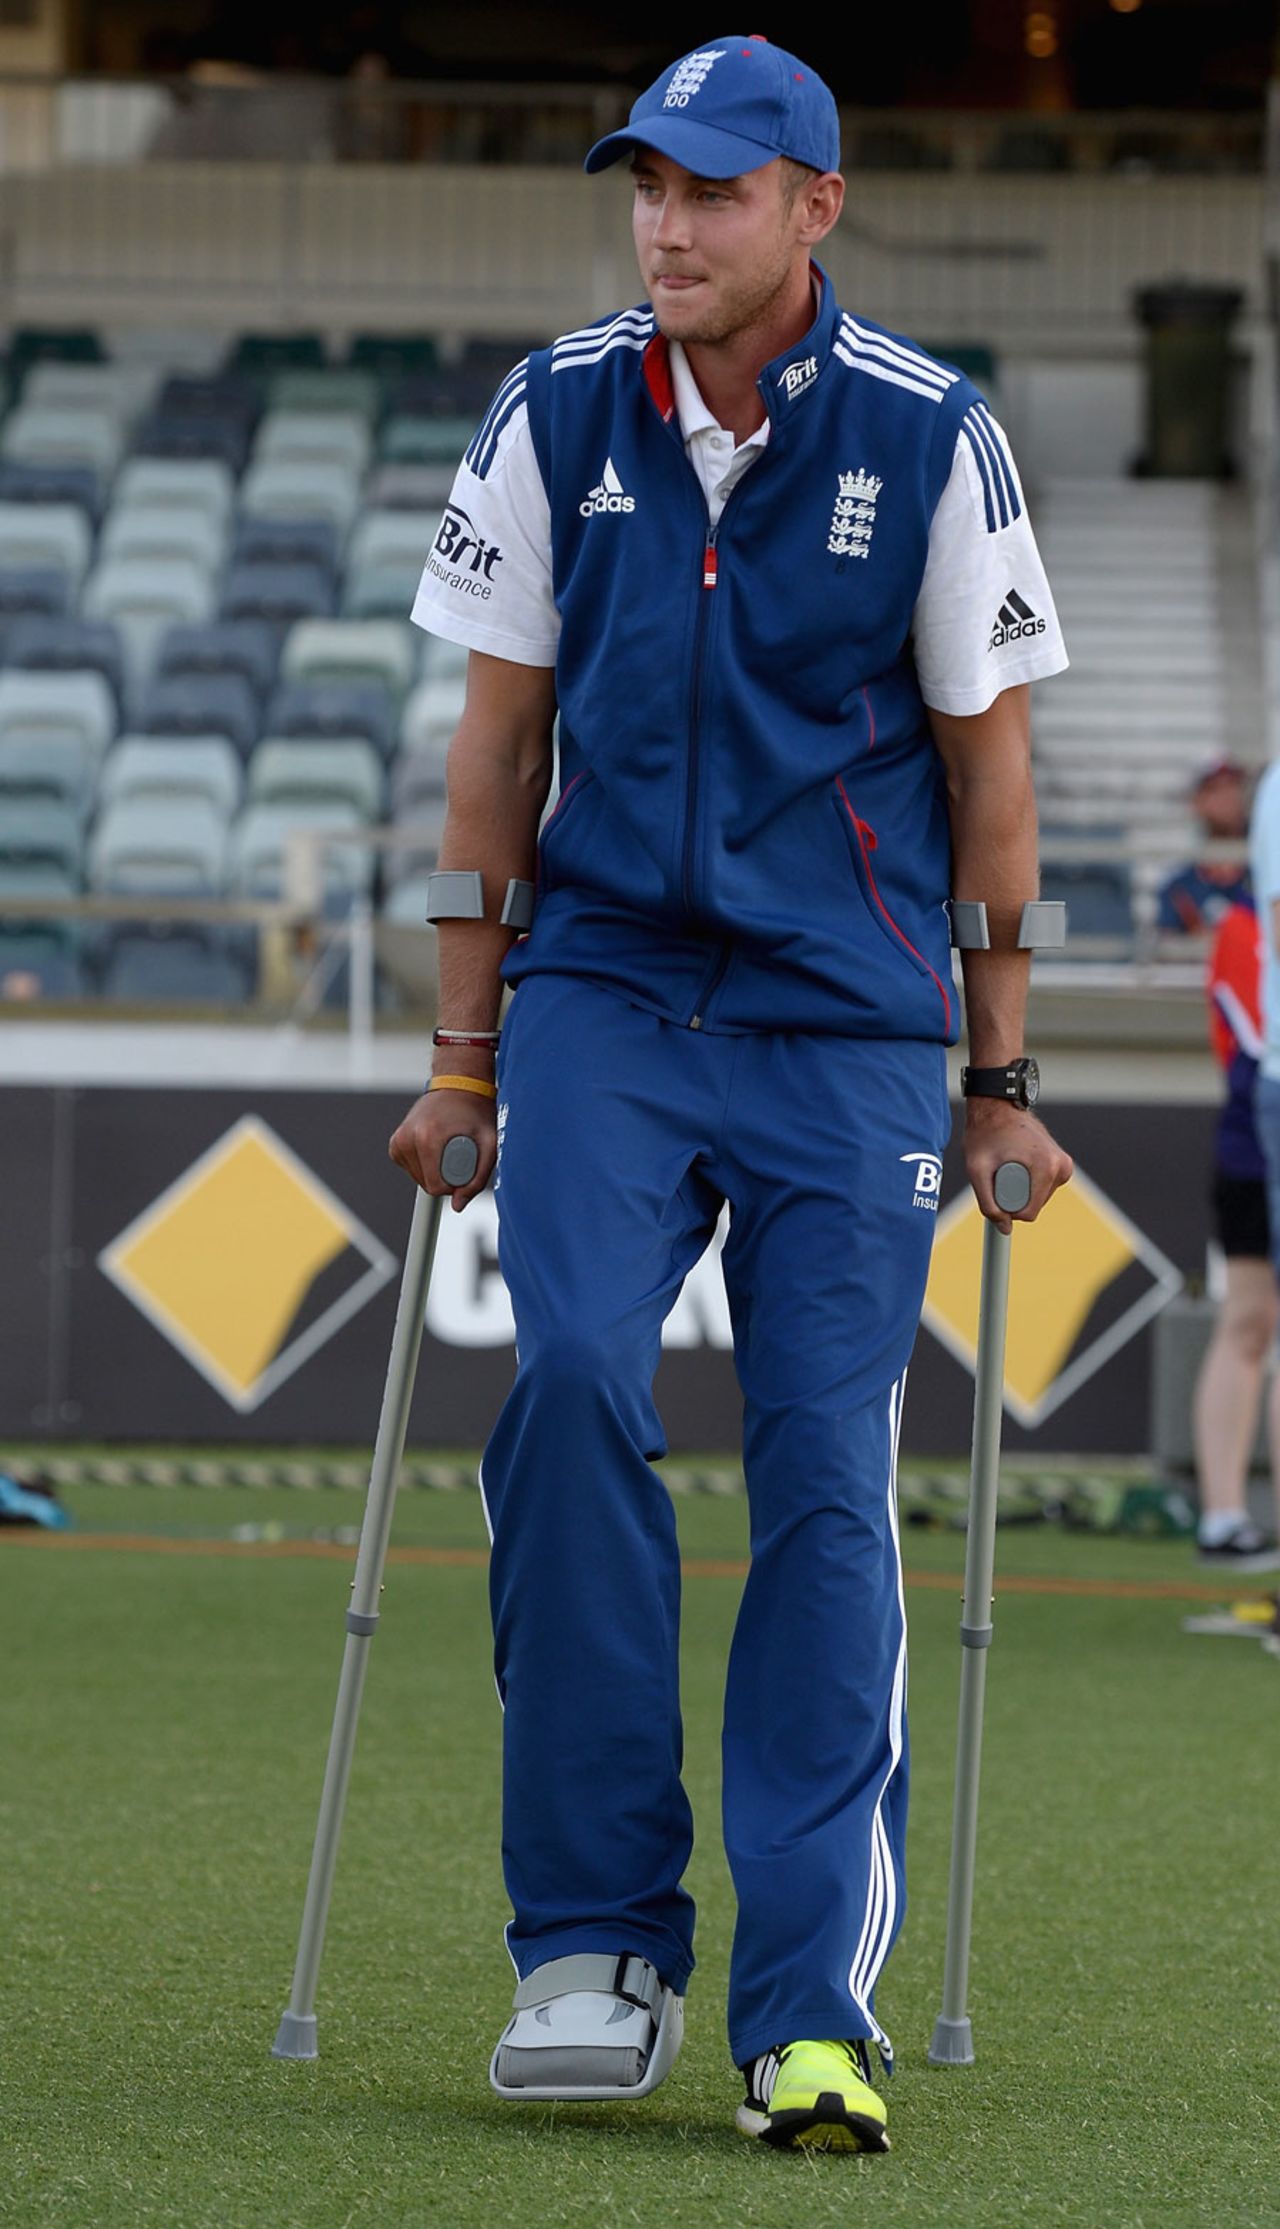 An injured Stuart Broad walks on the outfield after the third day's play, Australia v England, 3rd Test, Perth, 3rd day, December 15, 2013